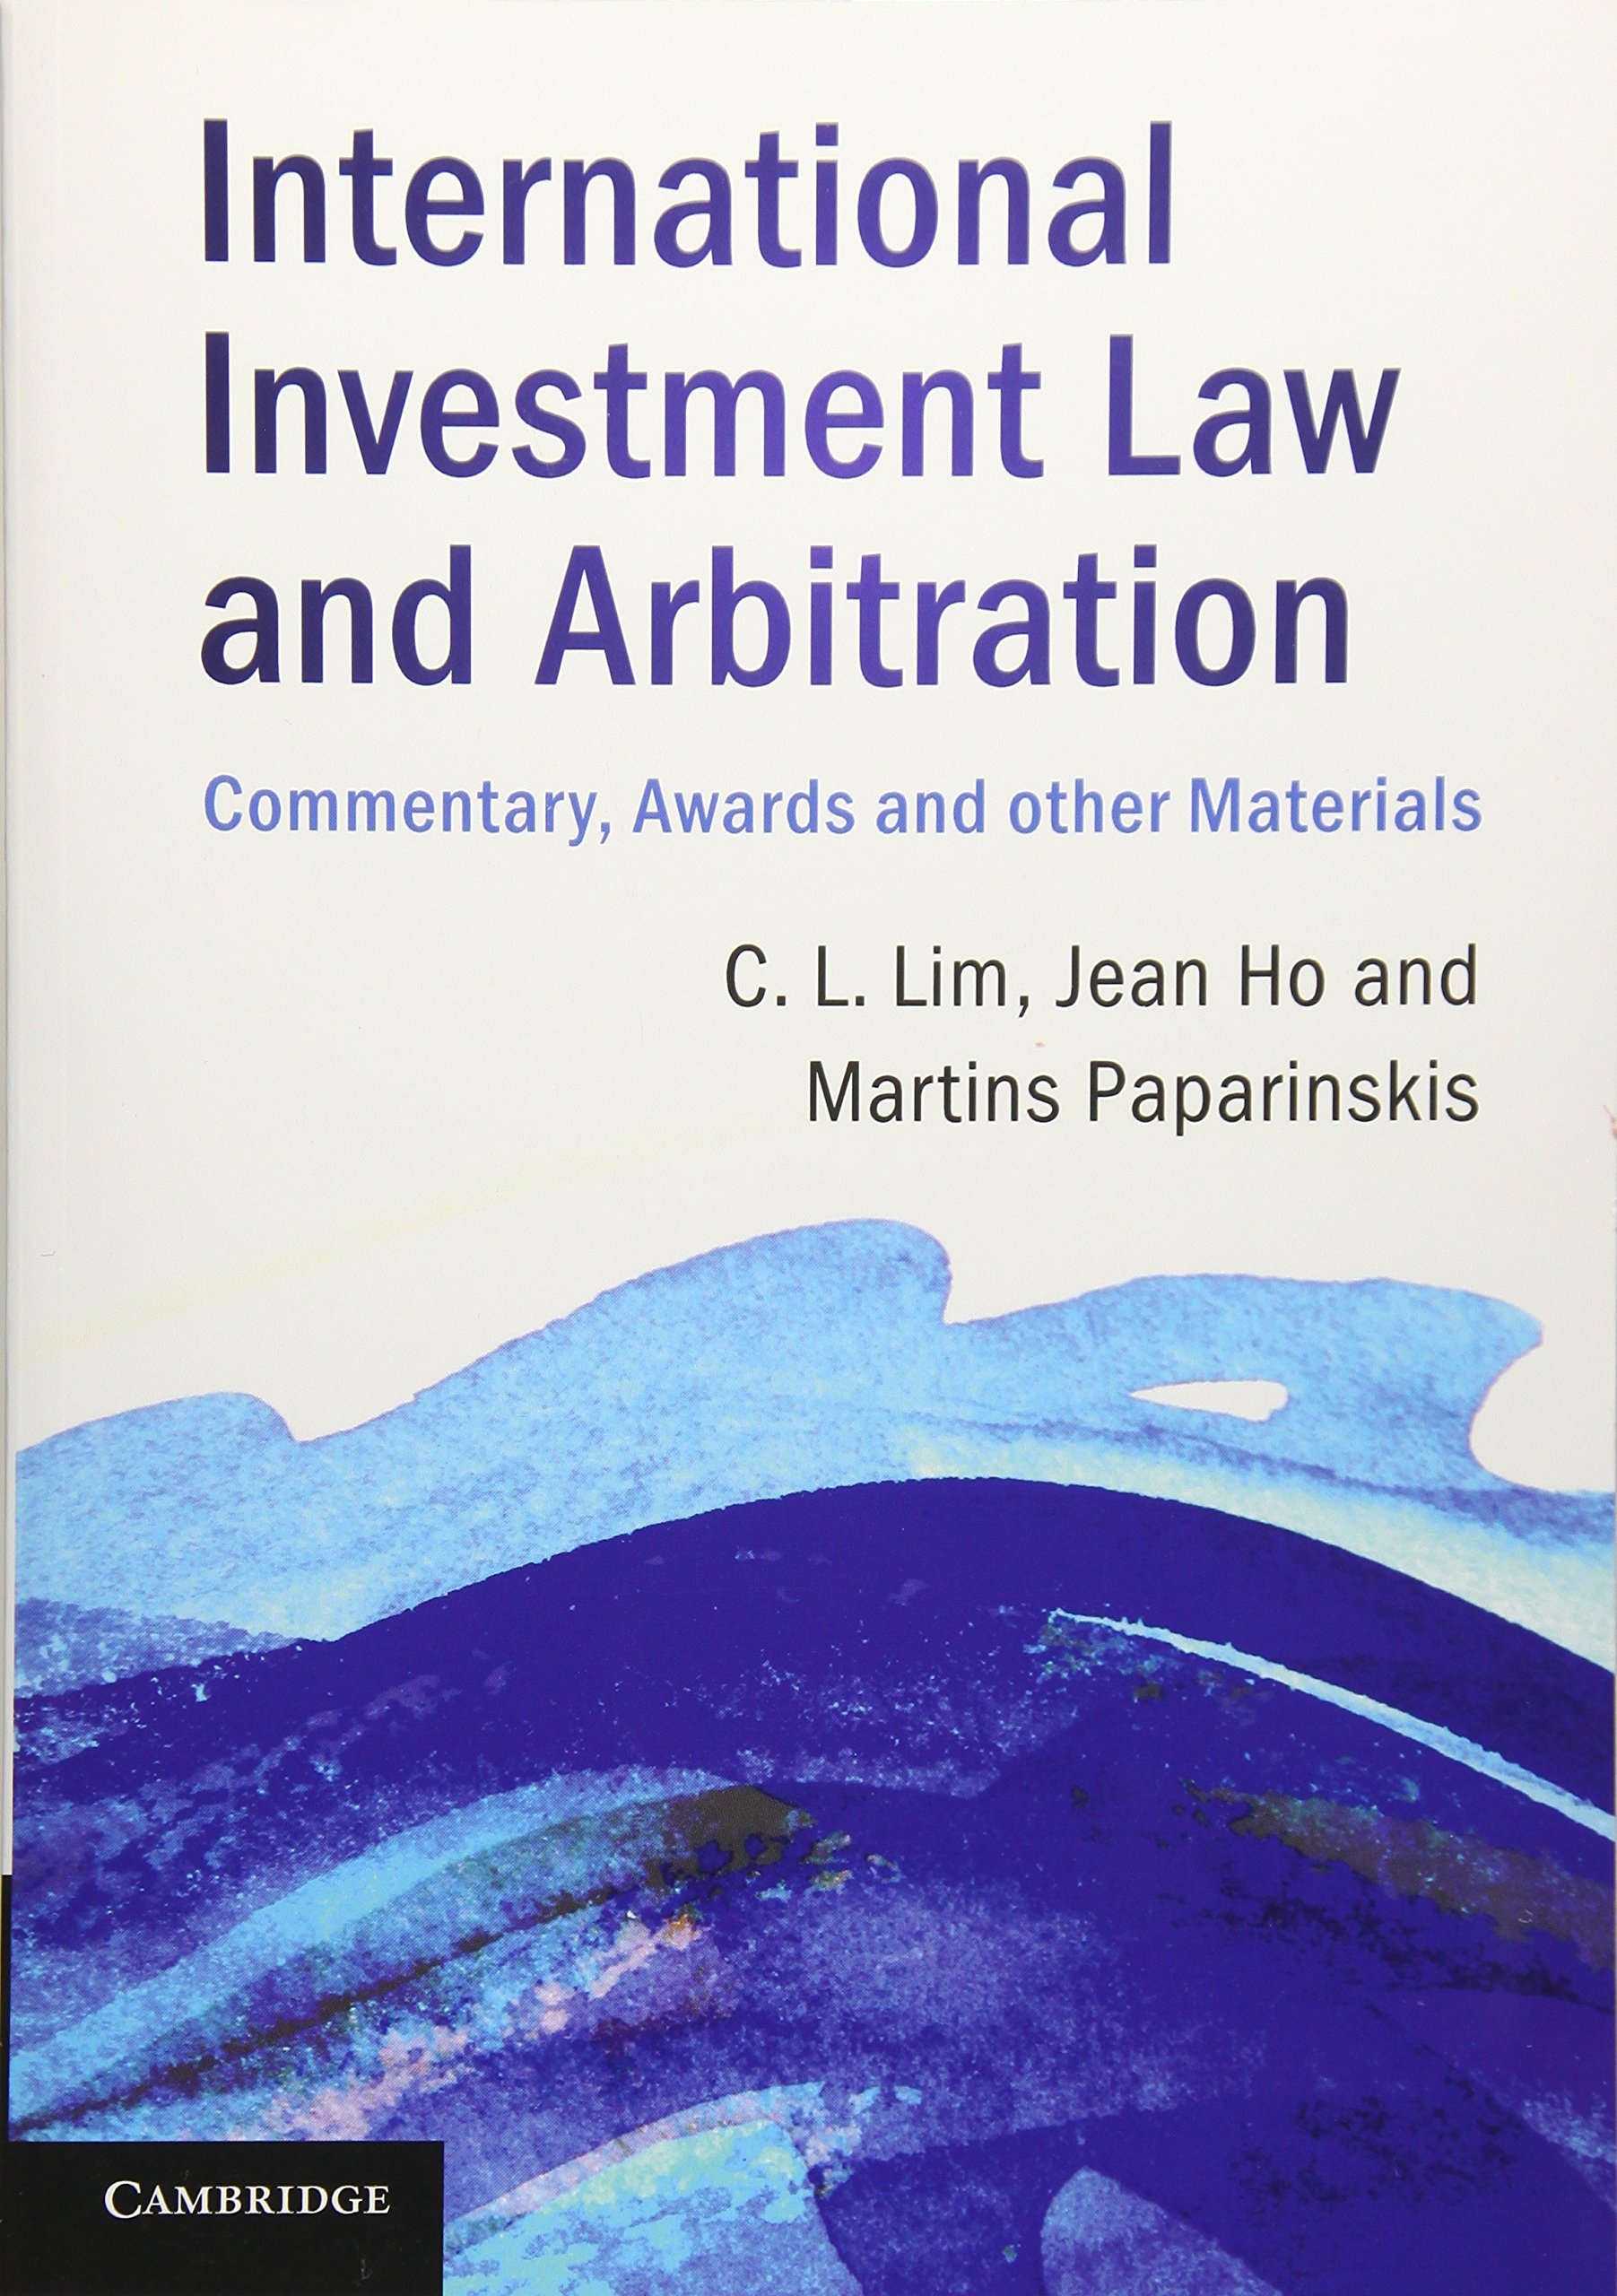 International Investment Law and Arbitration: Commentary, Awards and other Materials